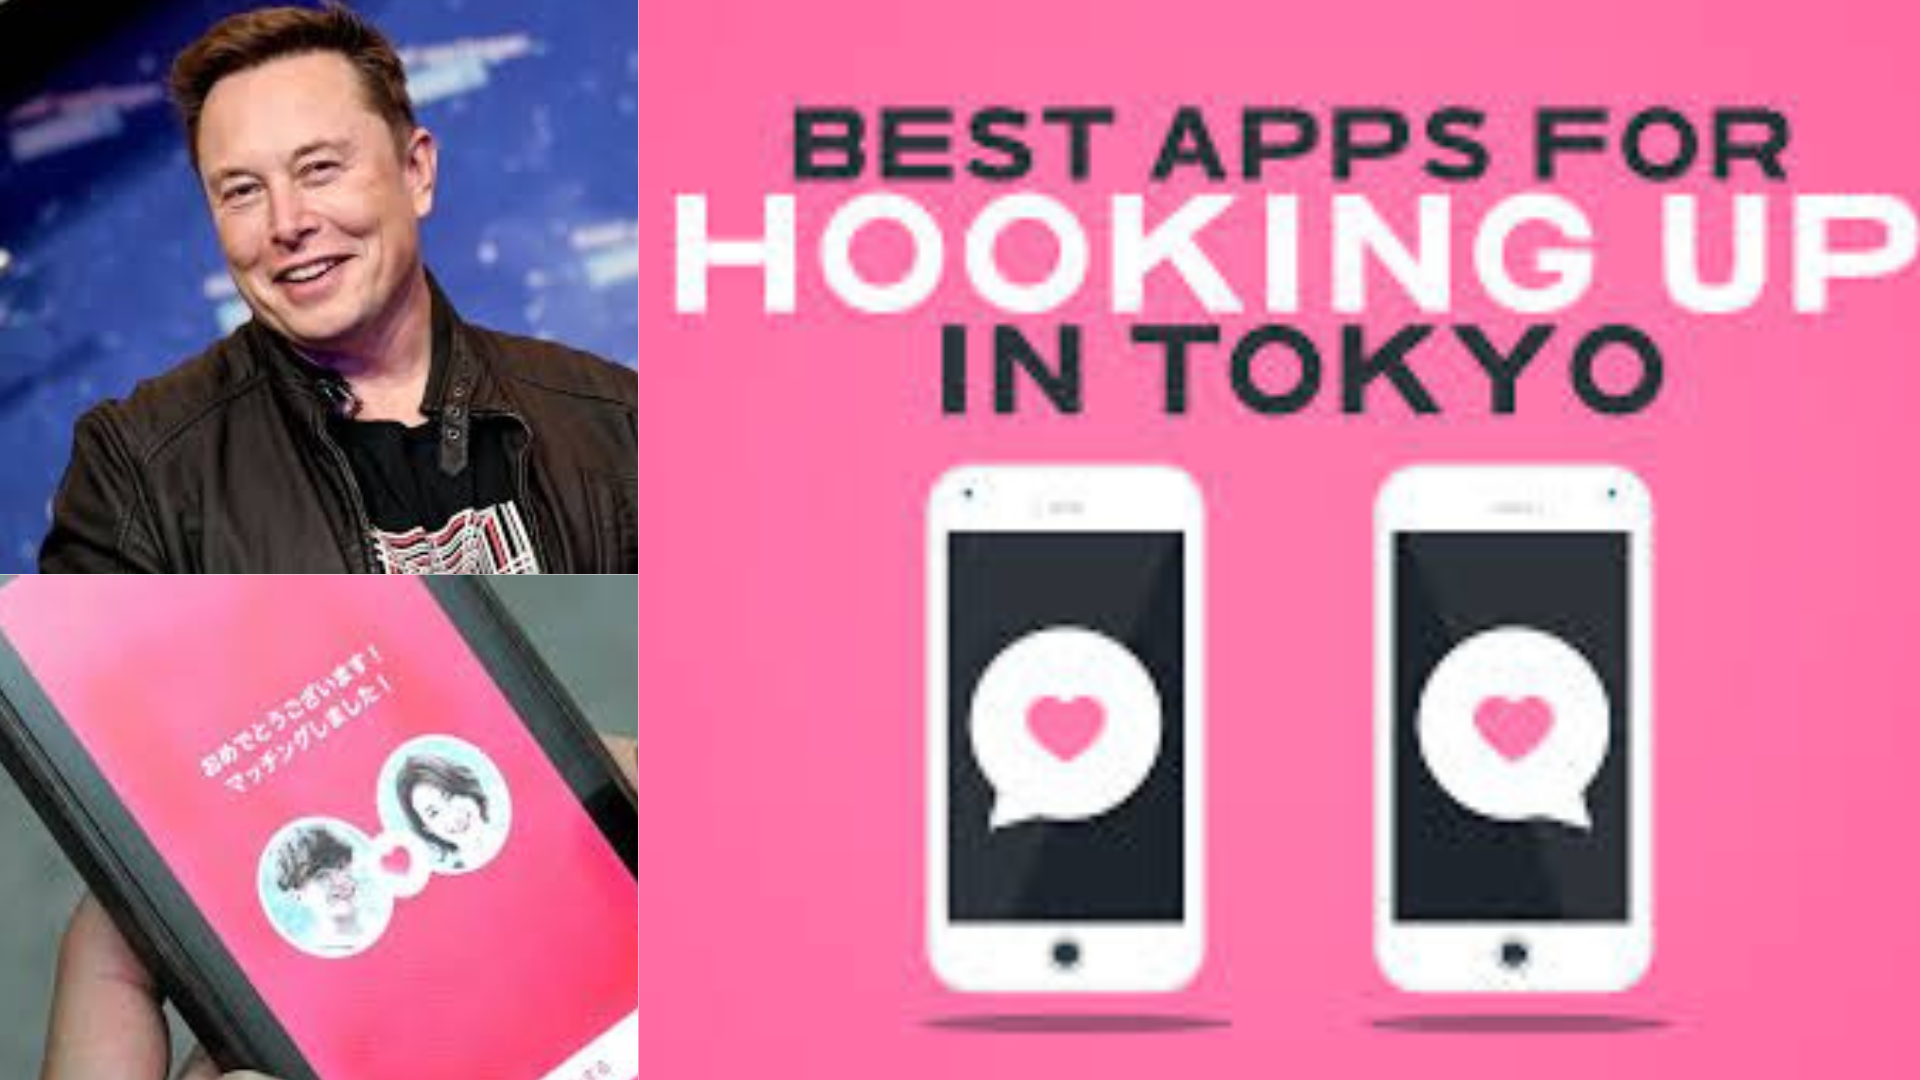 Tokyo’s Dating App Initiative Aims To Revitalize Birth Rate: ‘I Am Glad’ Says Elon Musk